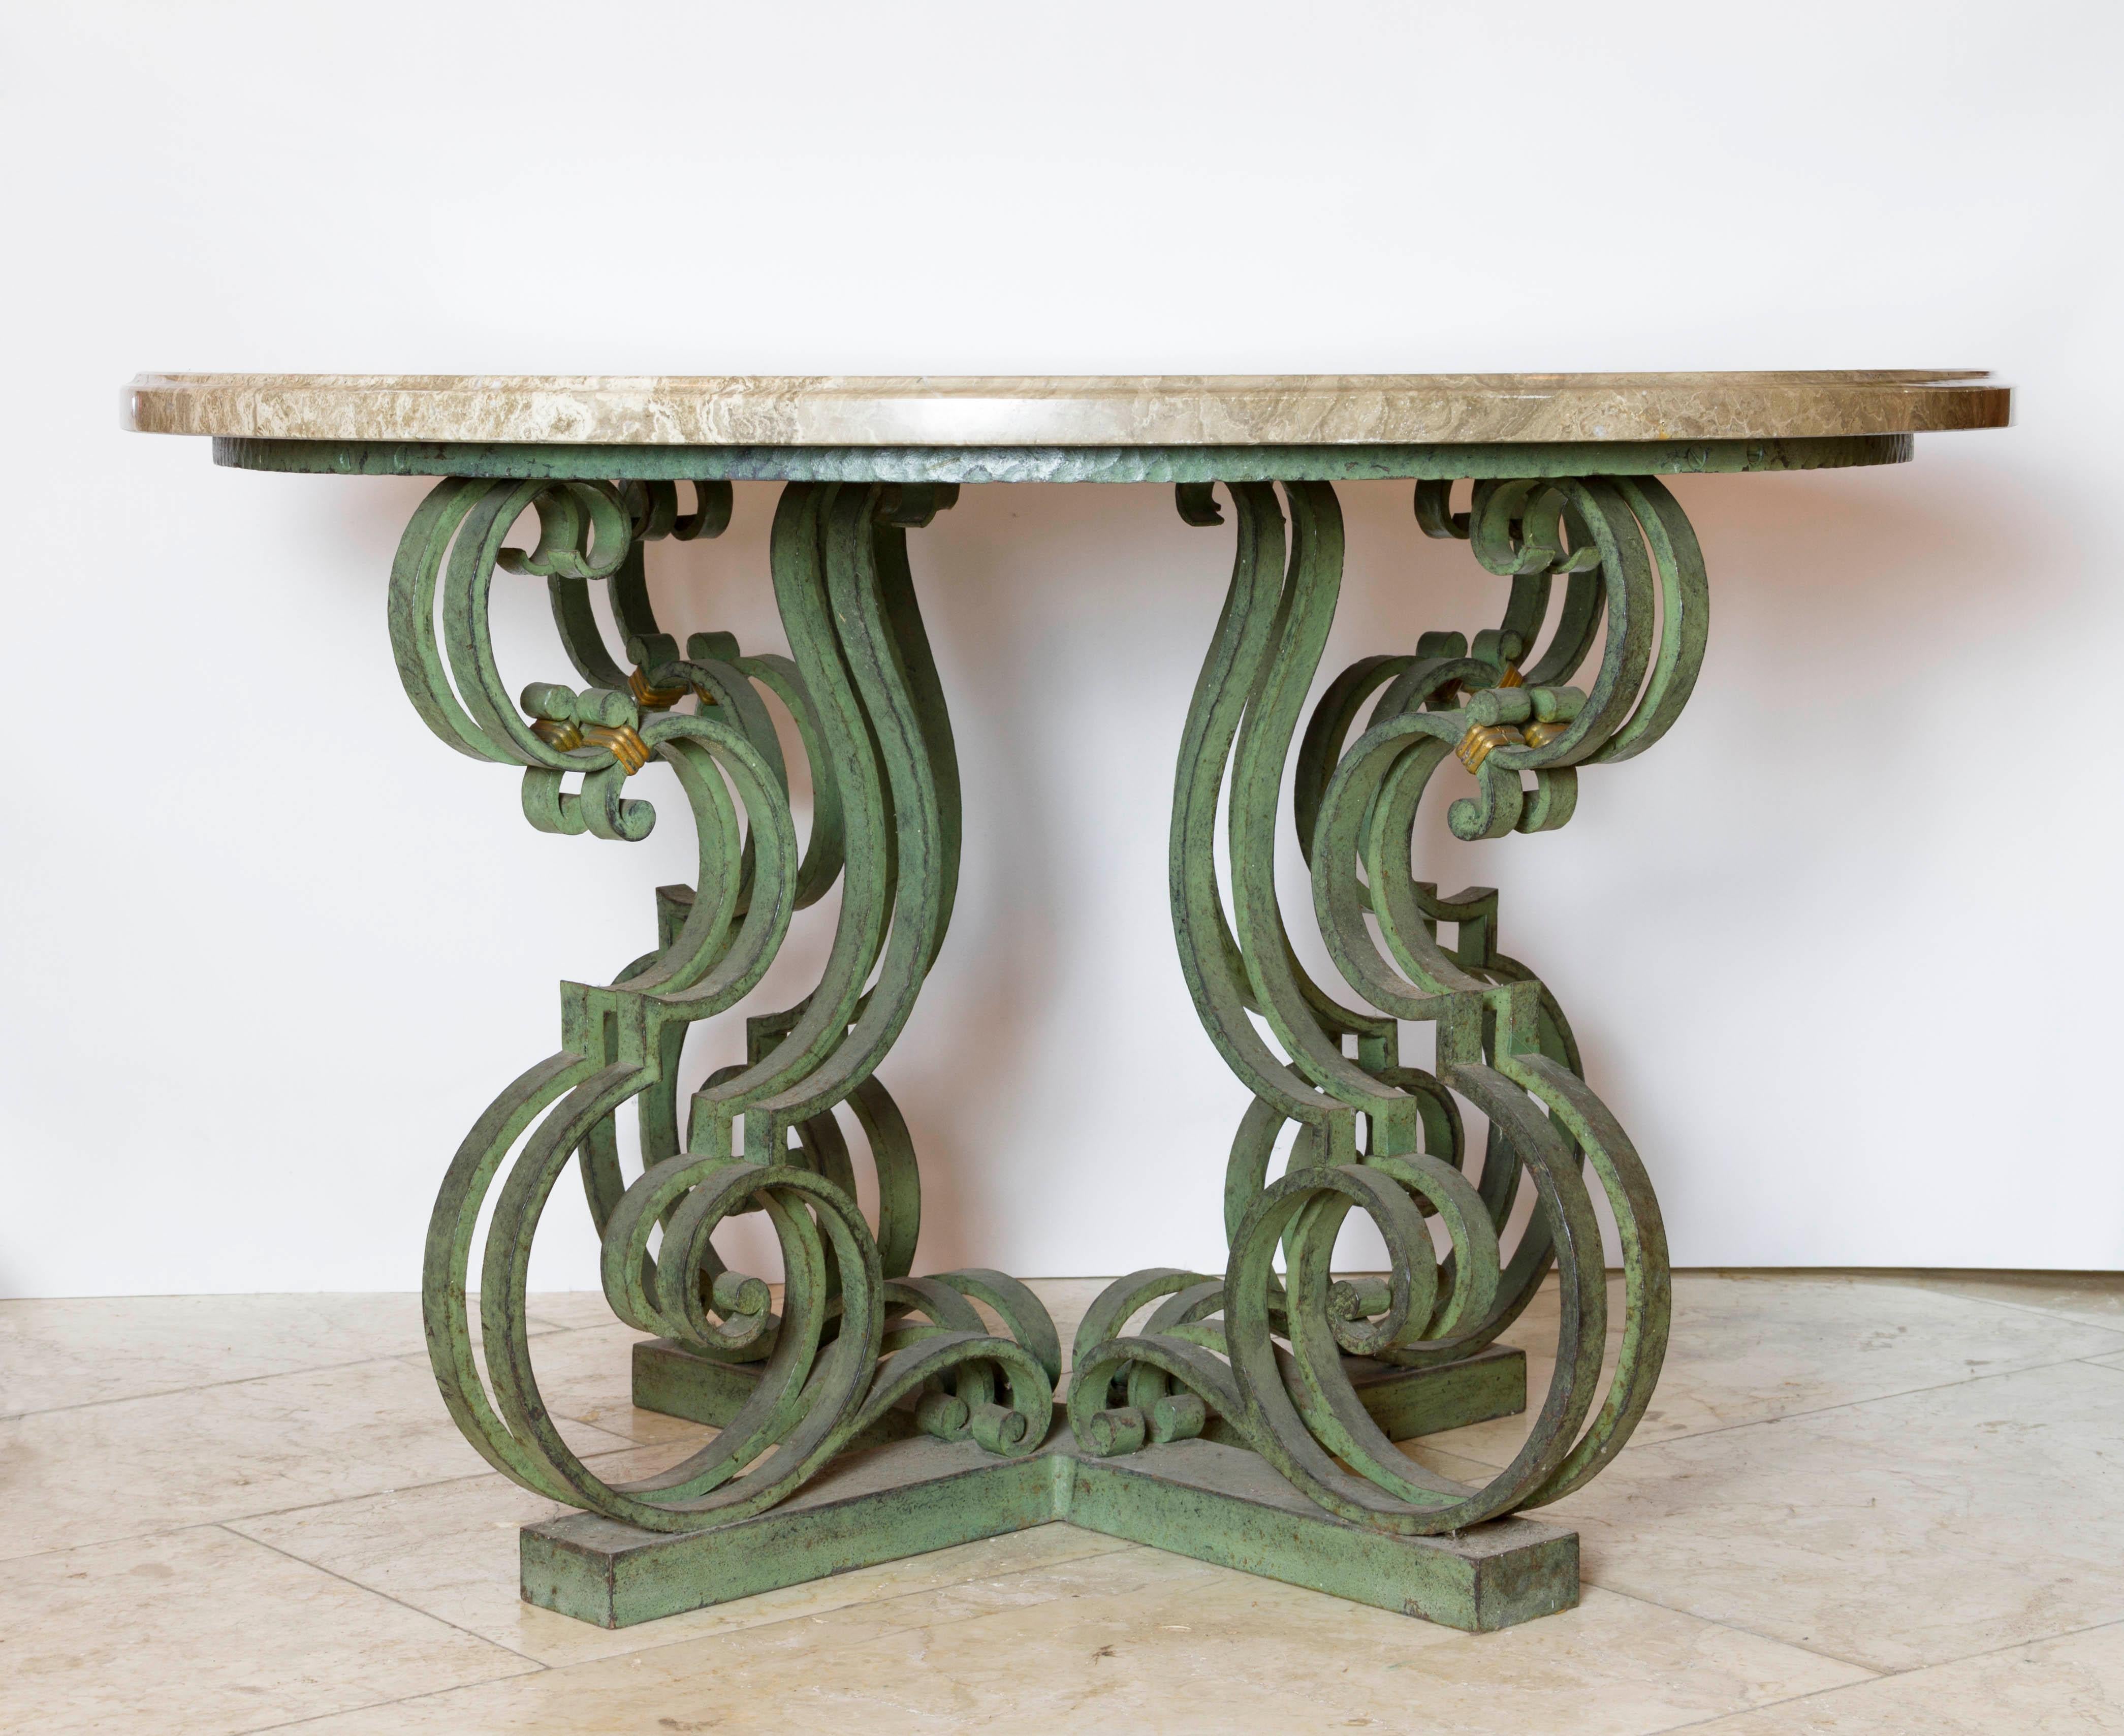 French Art Deco Wrought Iron Marble-Top Table 1930s/1940s 
attributed to Raymond Subes

Original green painted with gilding, polished travertine marble top